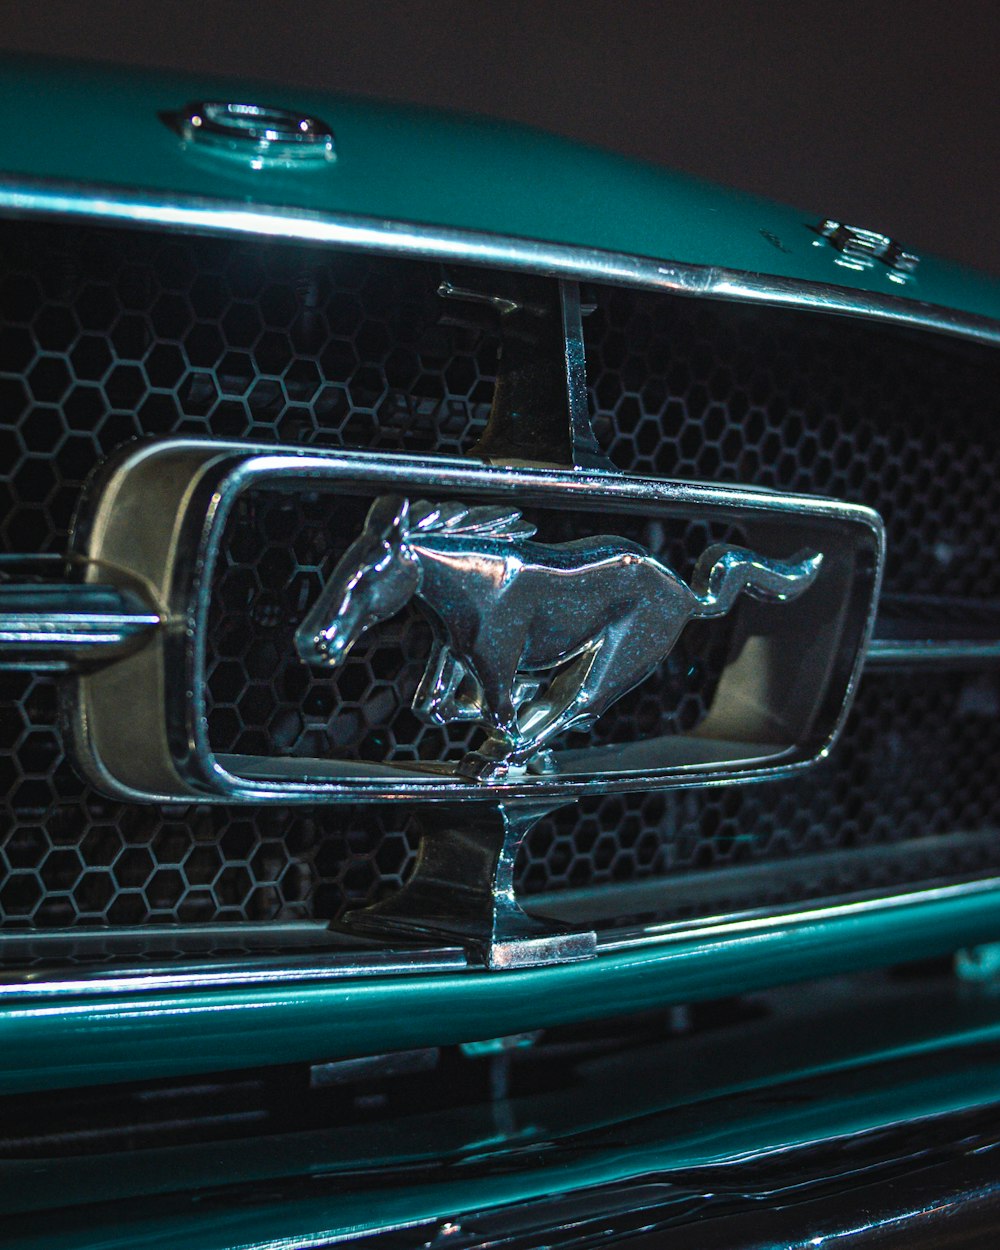 a close up of a horse emblem on the front of a car